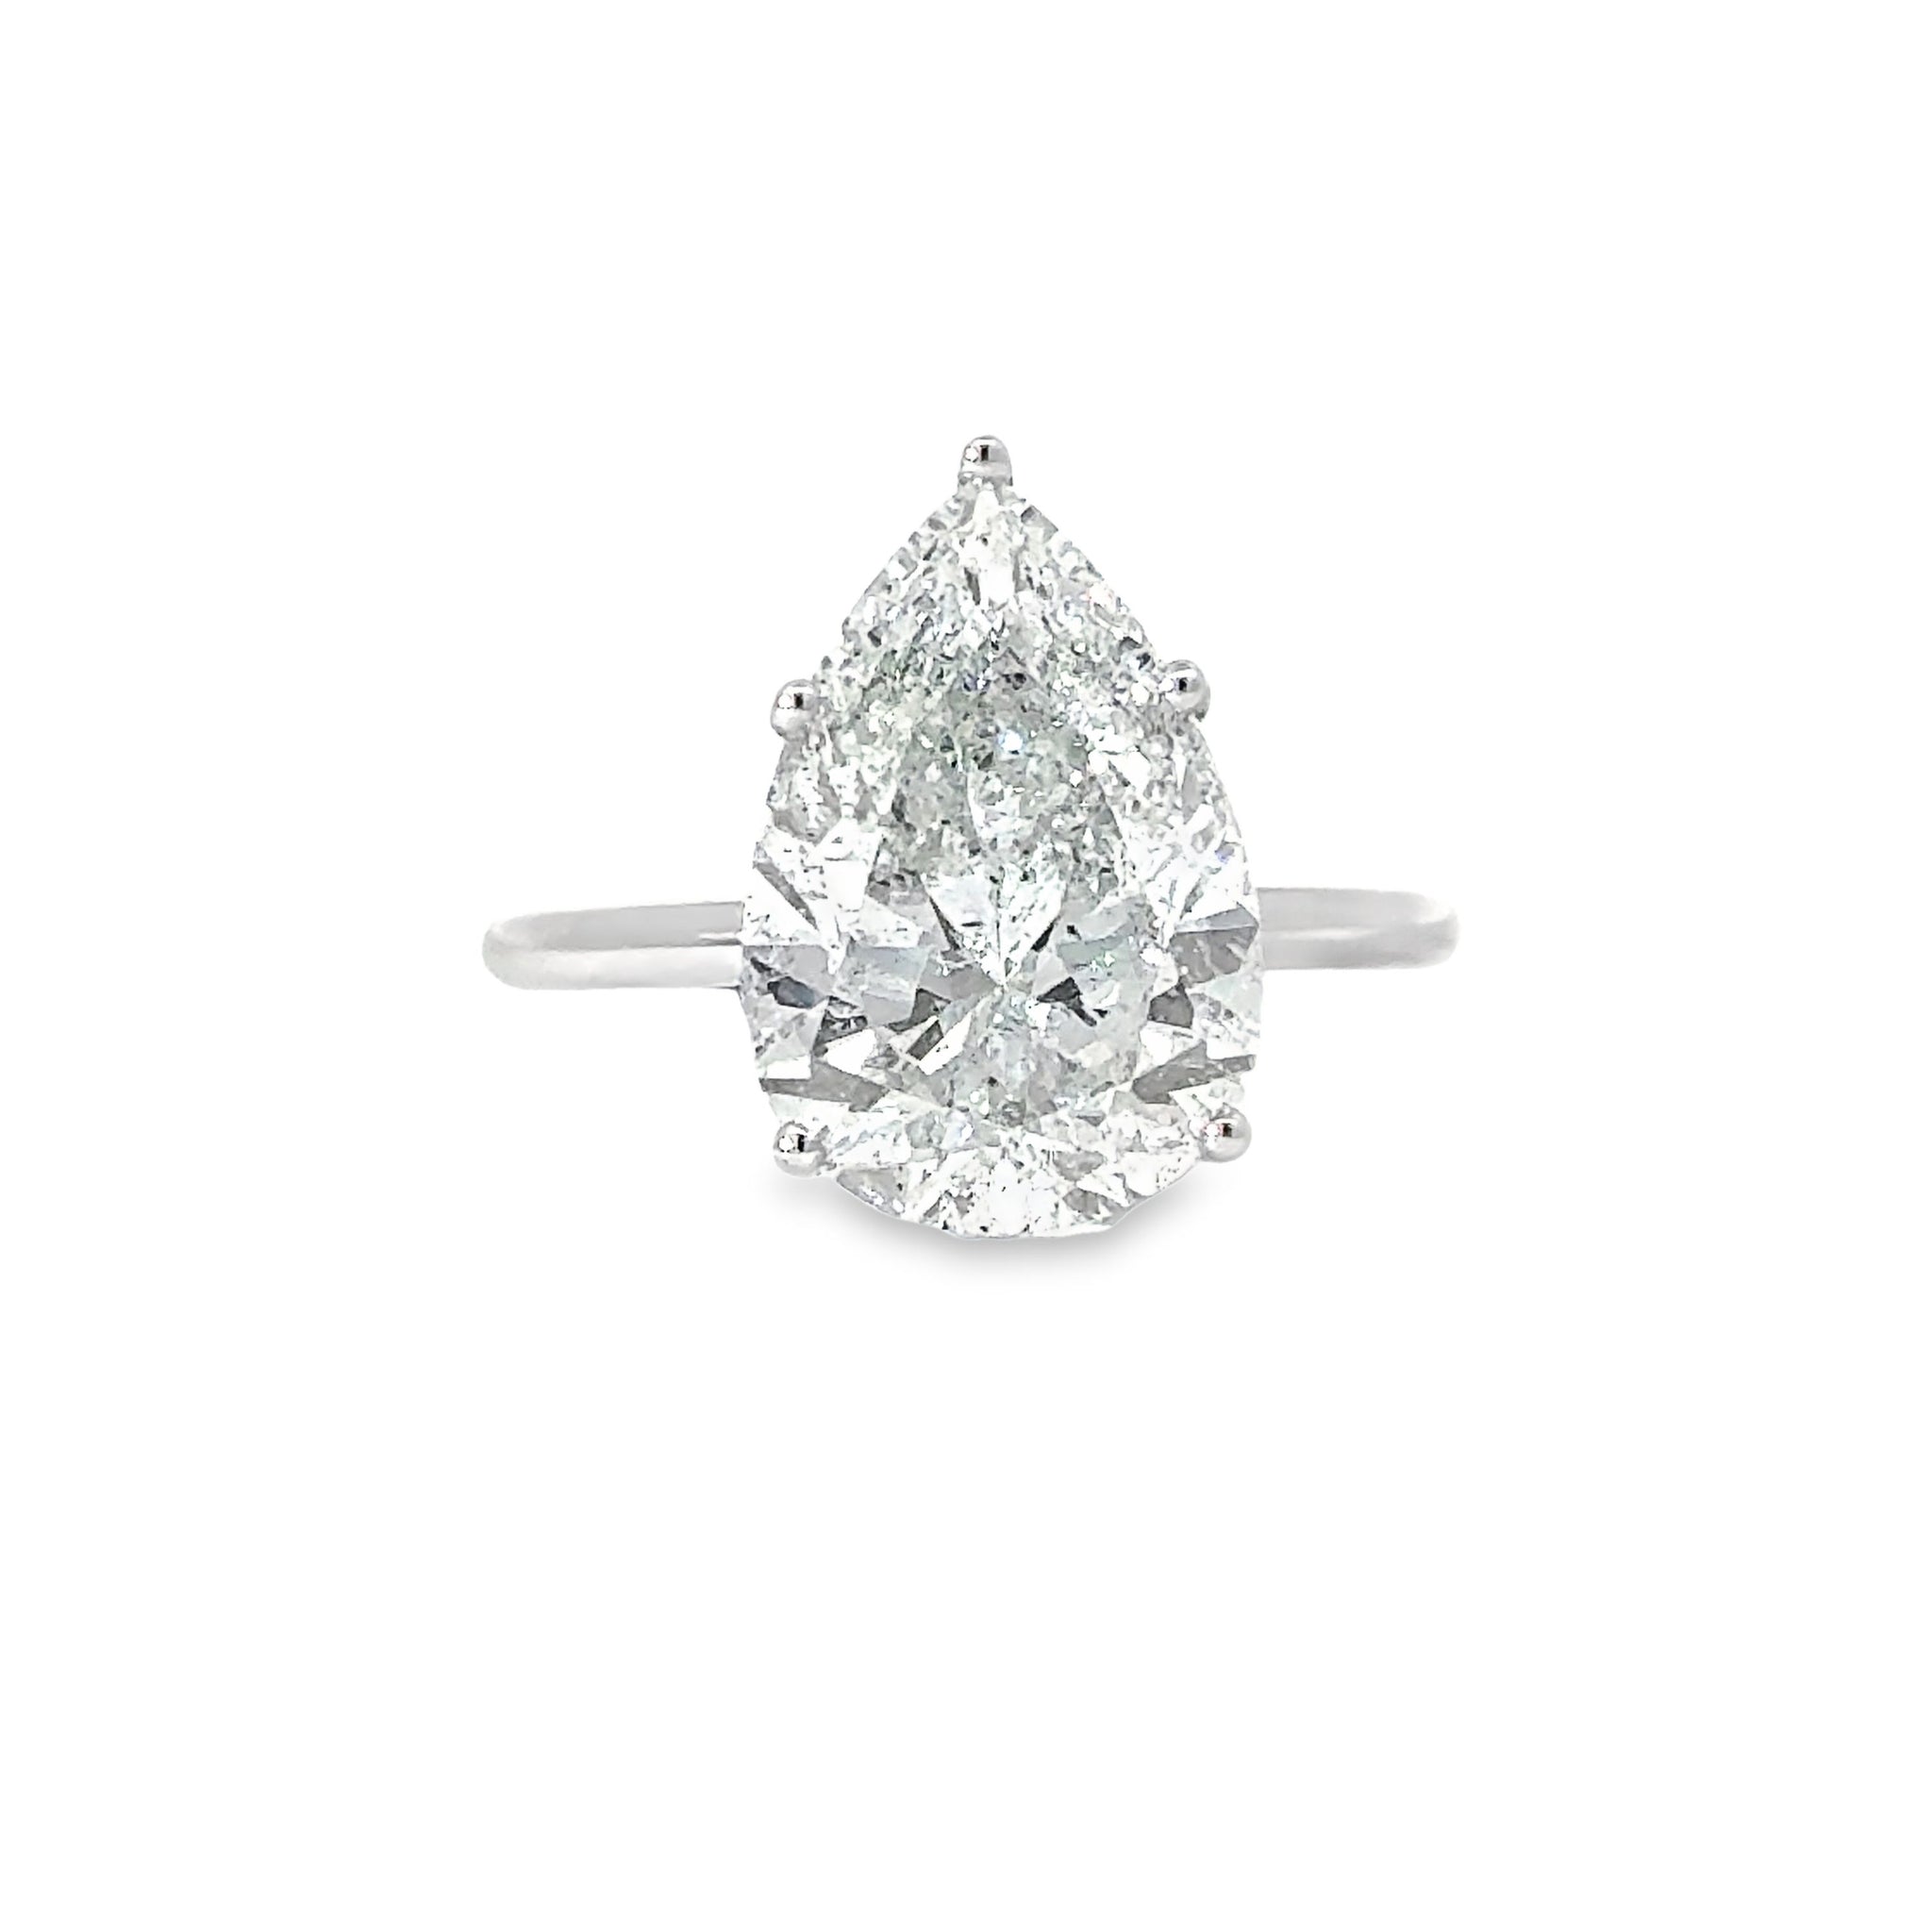 18k White Gold 5.33ct Pear Shape Diamond Solitaire Ring